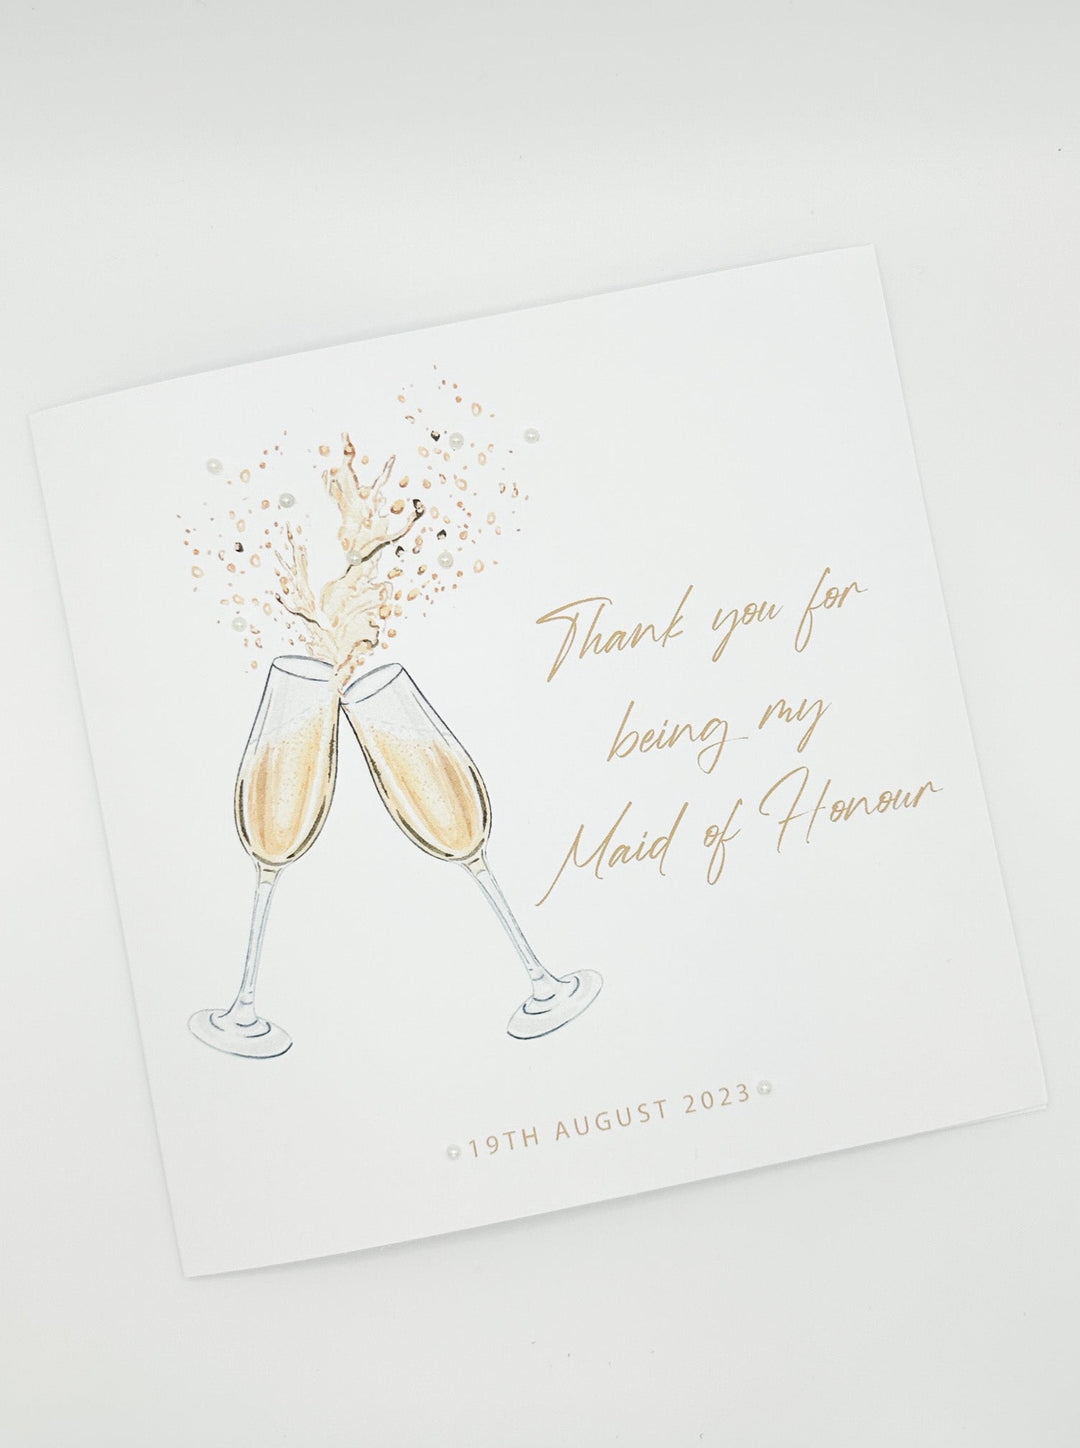 Wedding Maid of Honour Thank You Card - Glasses of Fizz